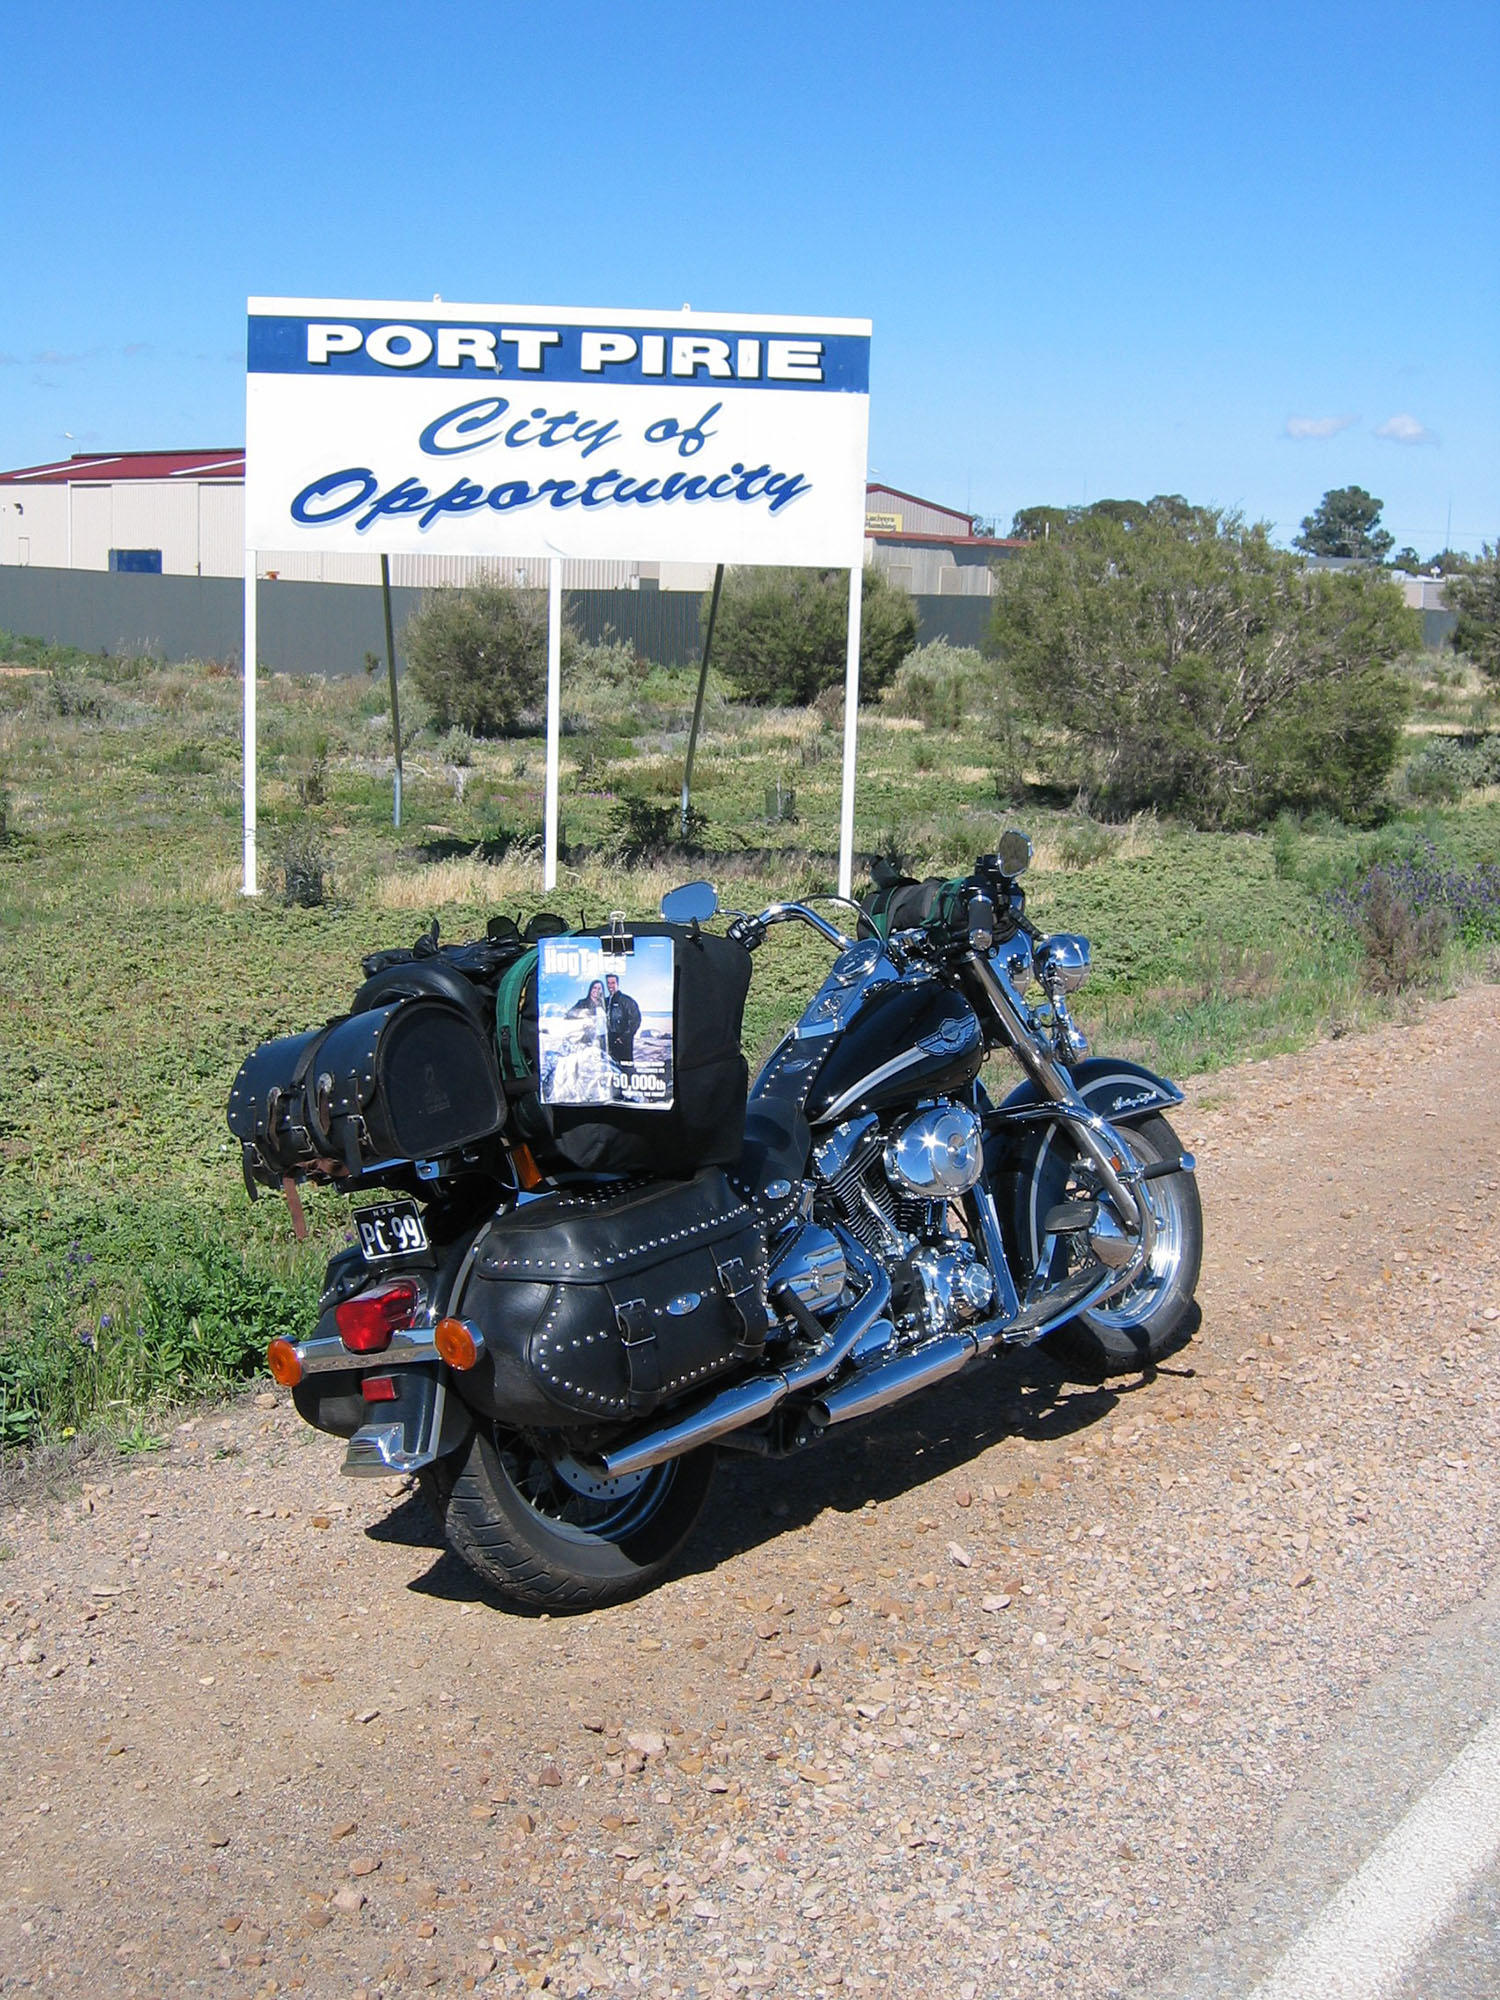 ON THE OUTSKIRTS OF PORT PIRIE, SOUTH AUSTRALIA.